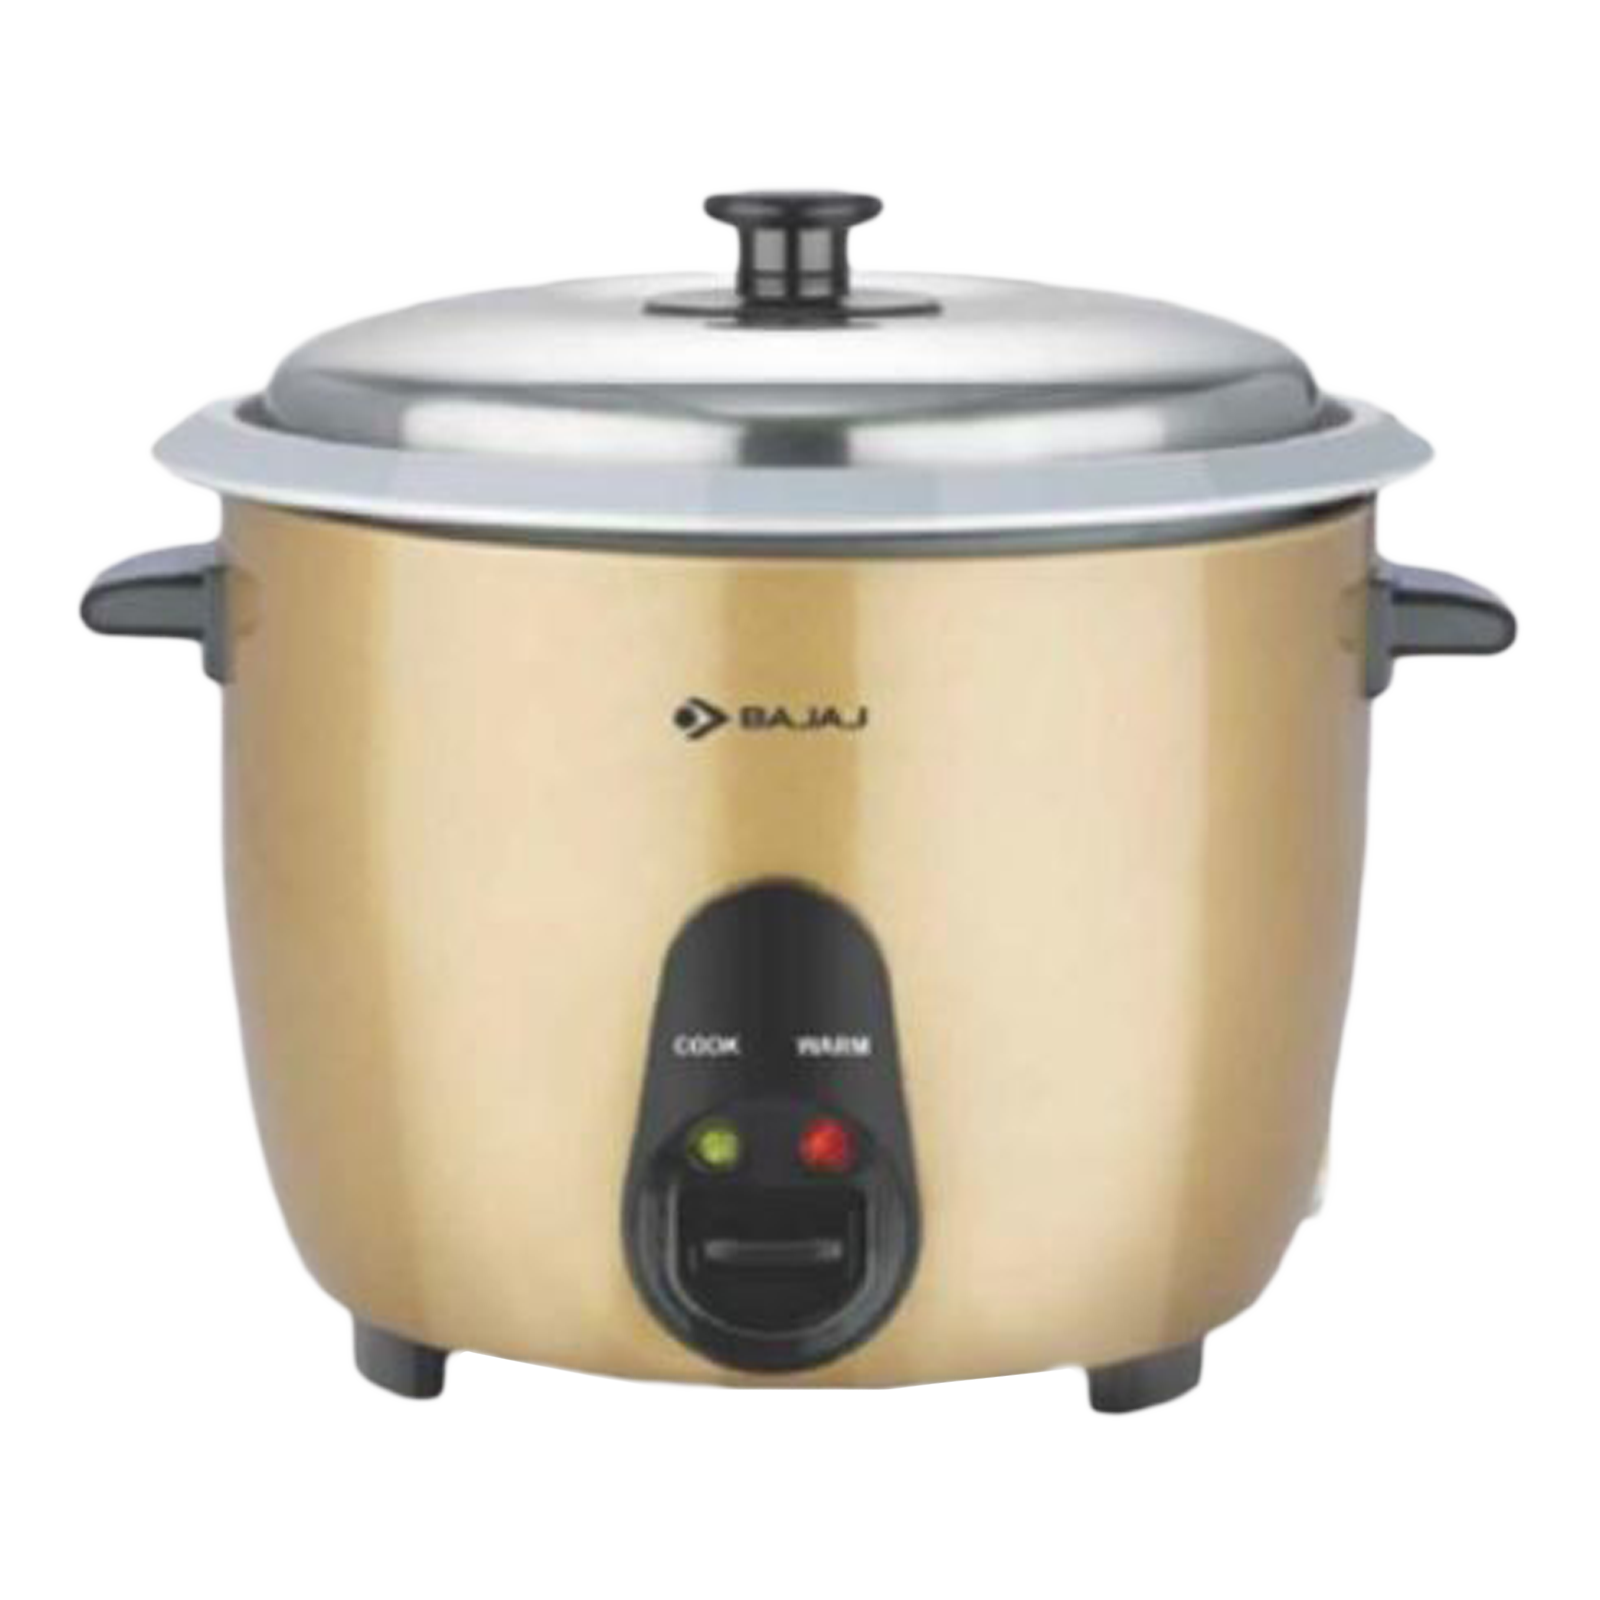 Buy BAJAJ DLX Duo 1.8 Litre Electric Rice Cooker with Keep Warm ...